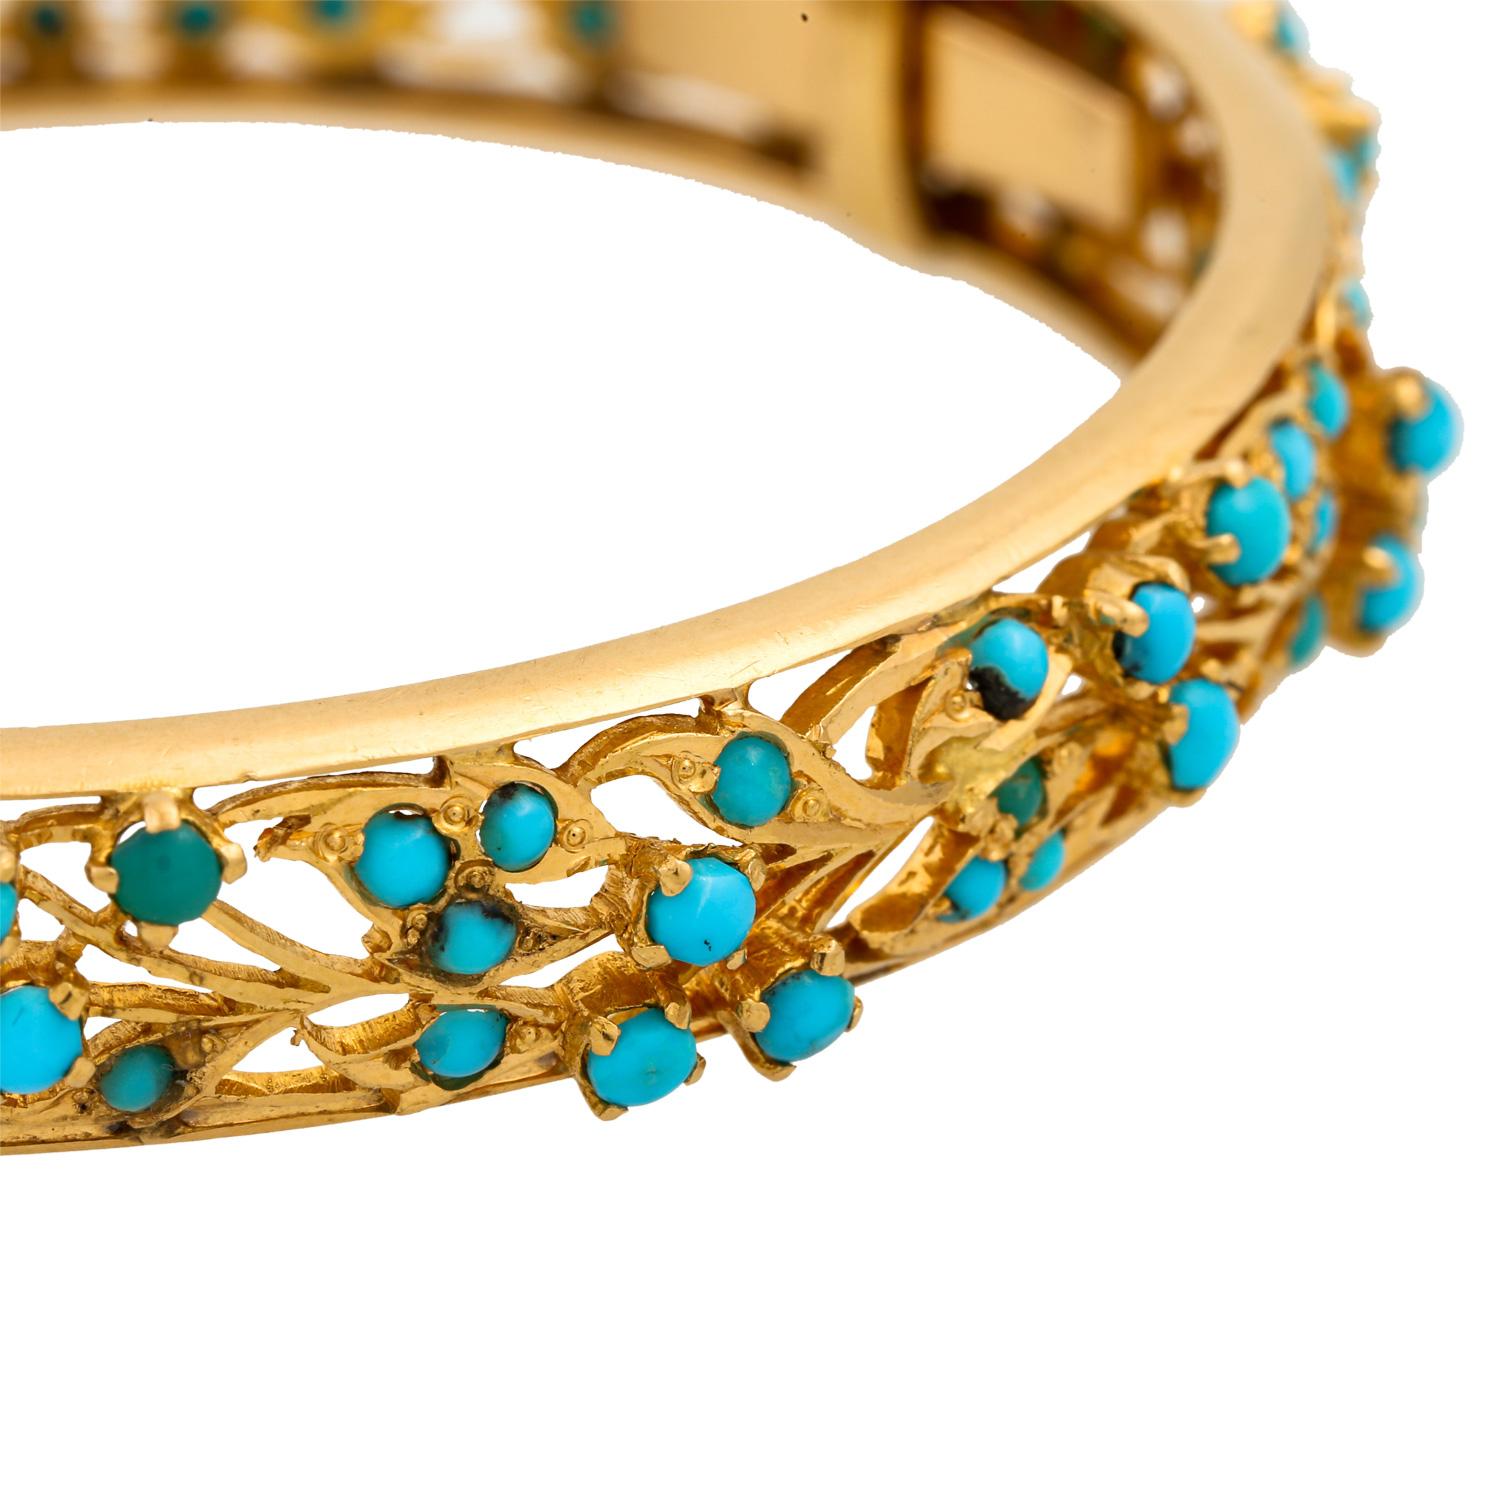 Filigree Bangle with Turquoise Cabochon For Sale 2